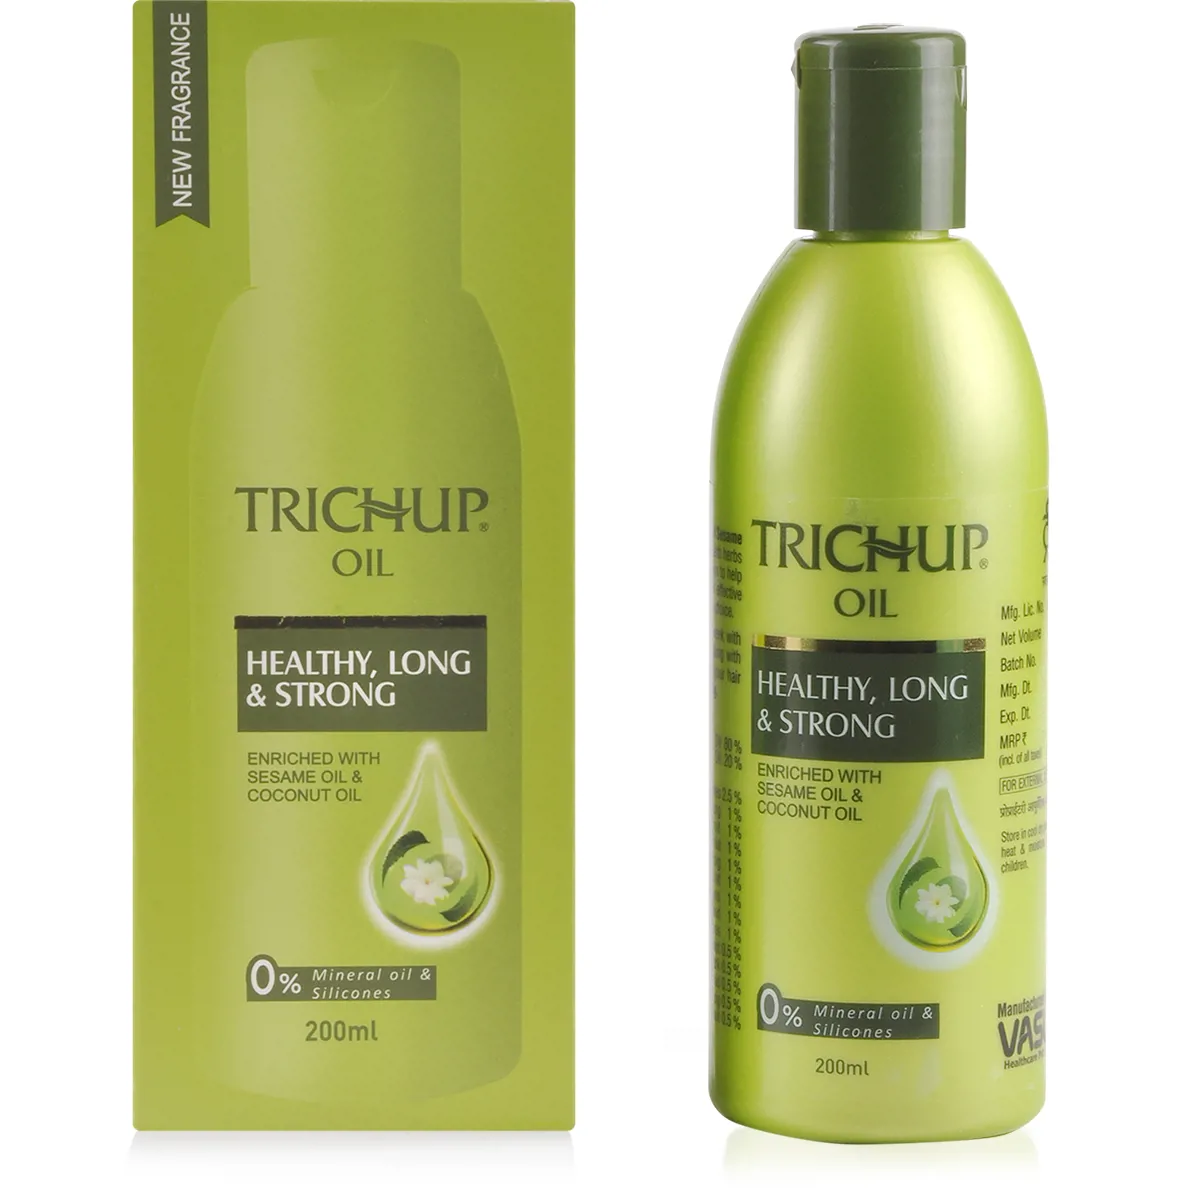 Trichup Healthy Long & Strong Oil 200ml